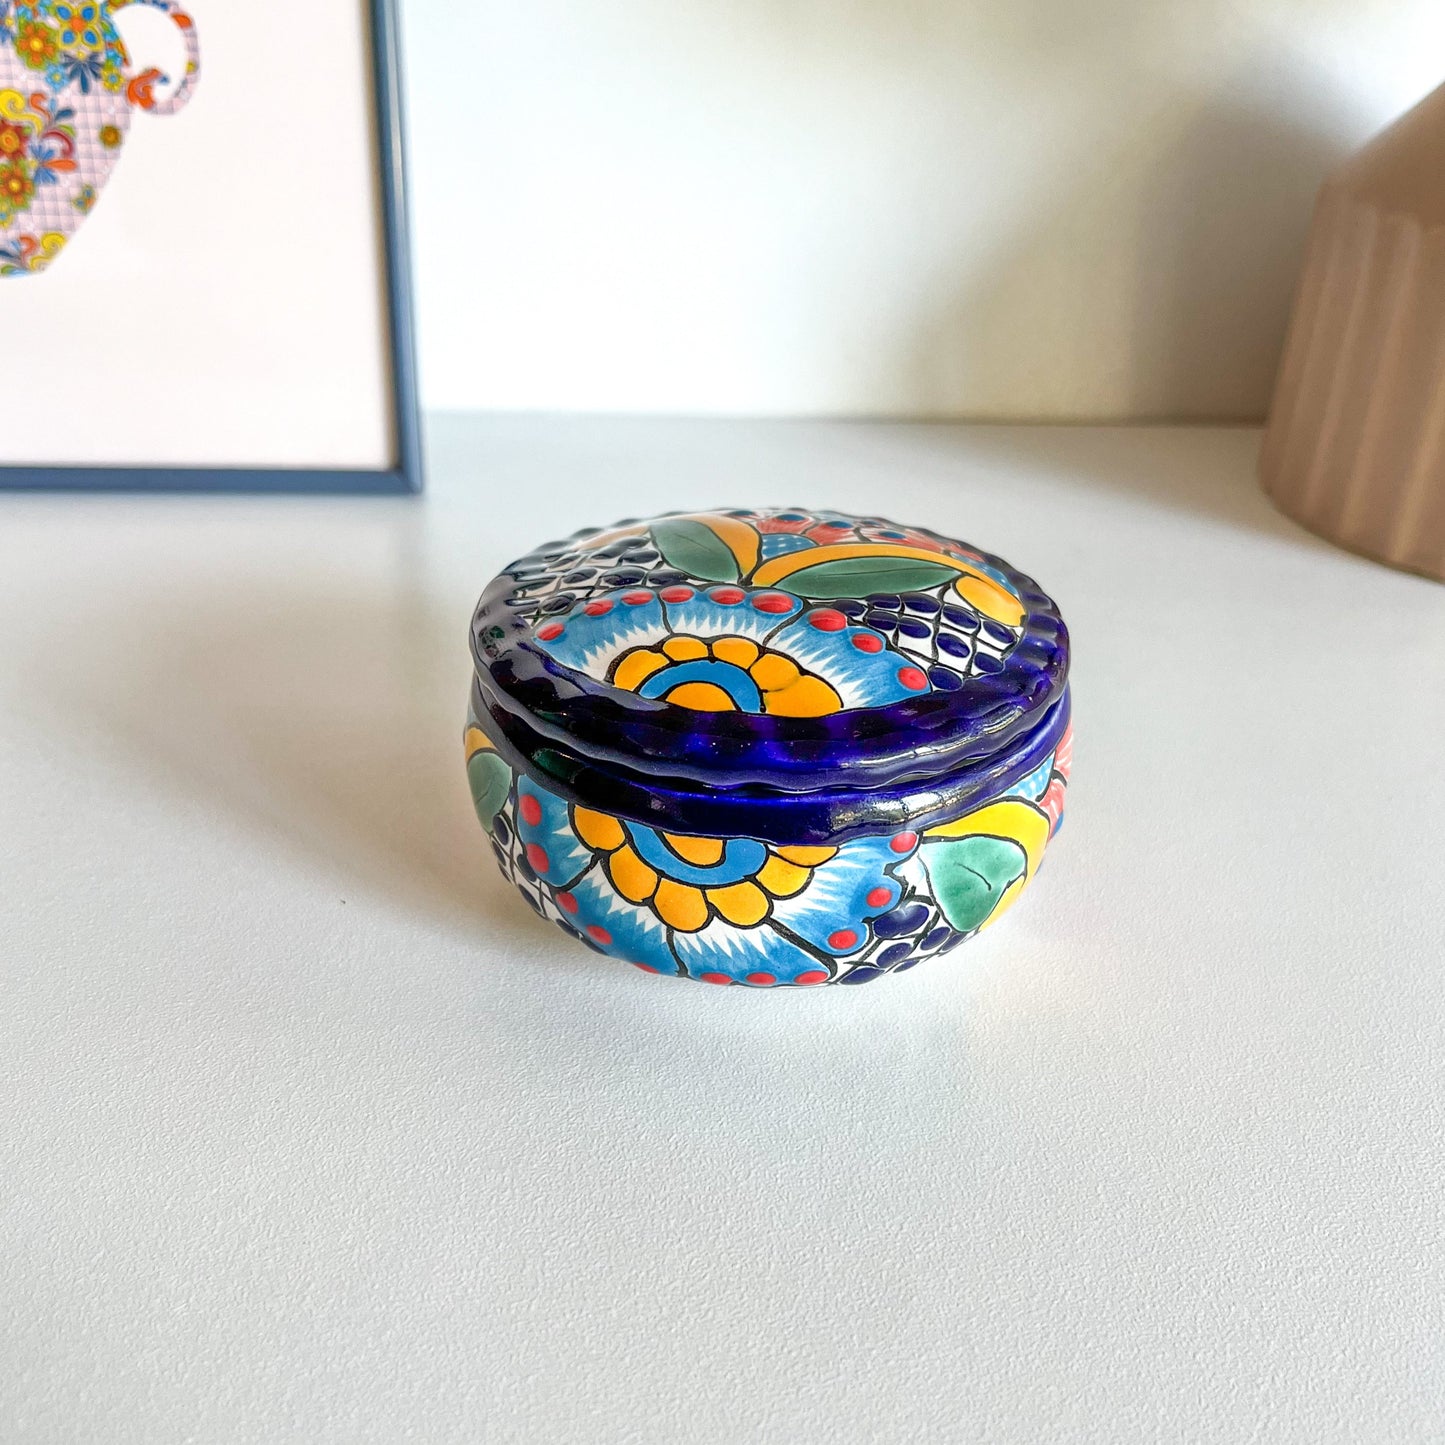 Wave of Candles x Camachos Pottery: Talavera Alhajero Soy Candle Collection ♥